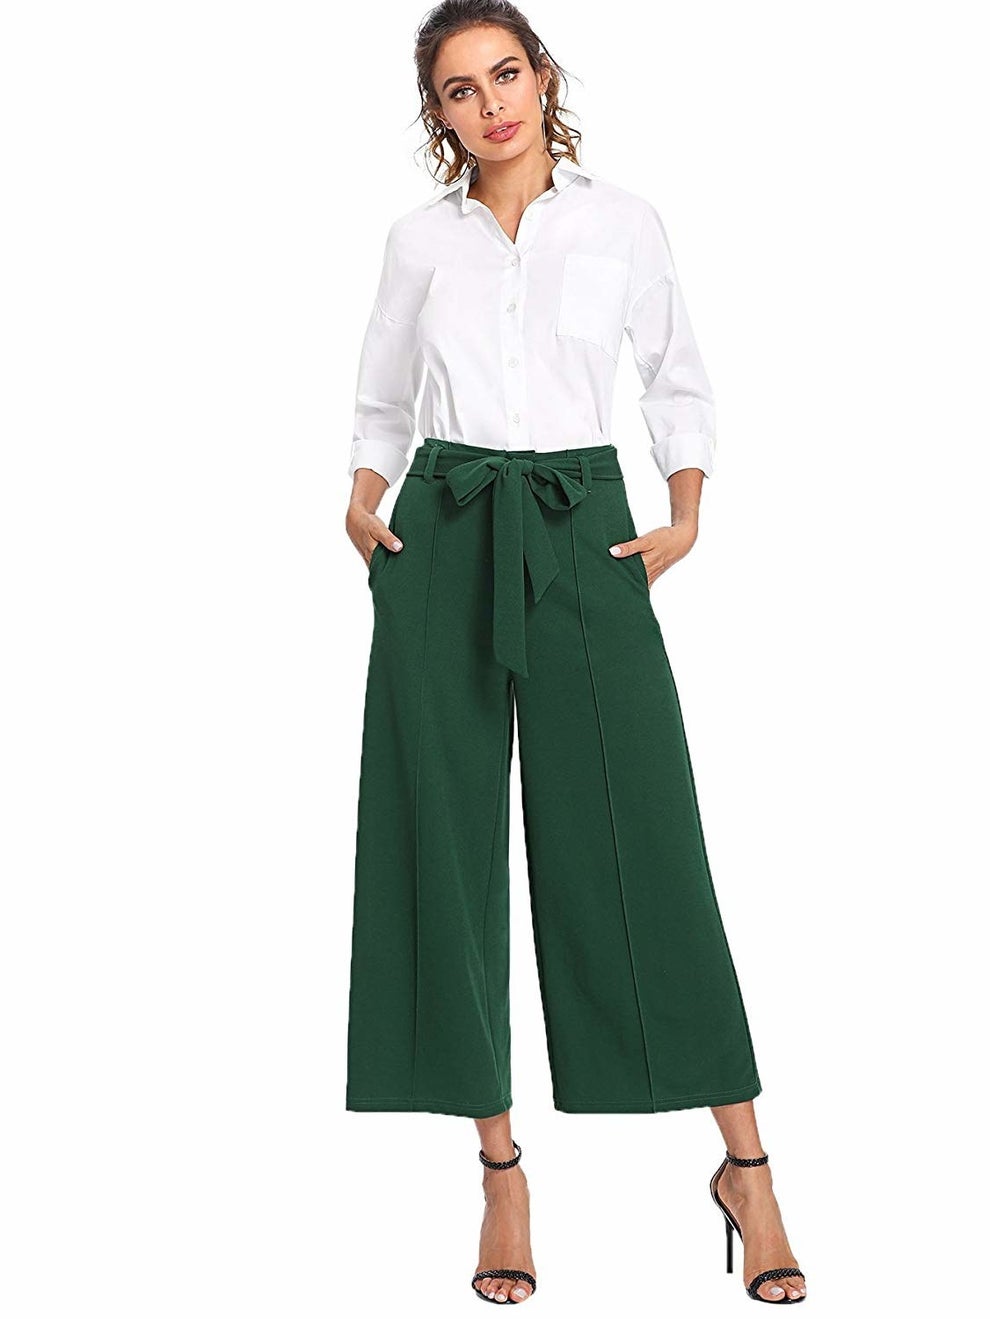 29 Pairs Of Pants For People Who Are Tired Of Jeans